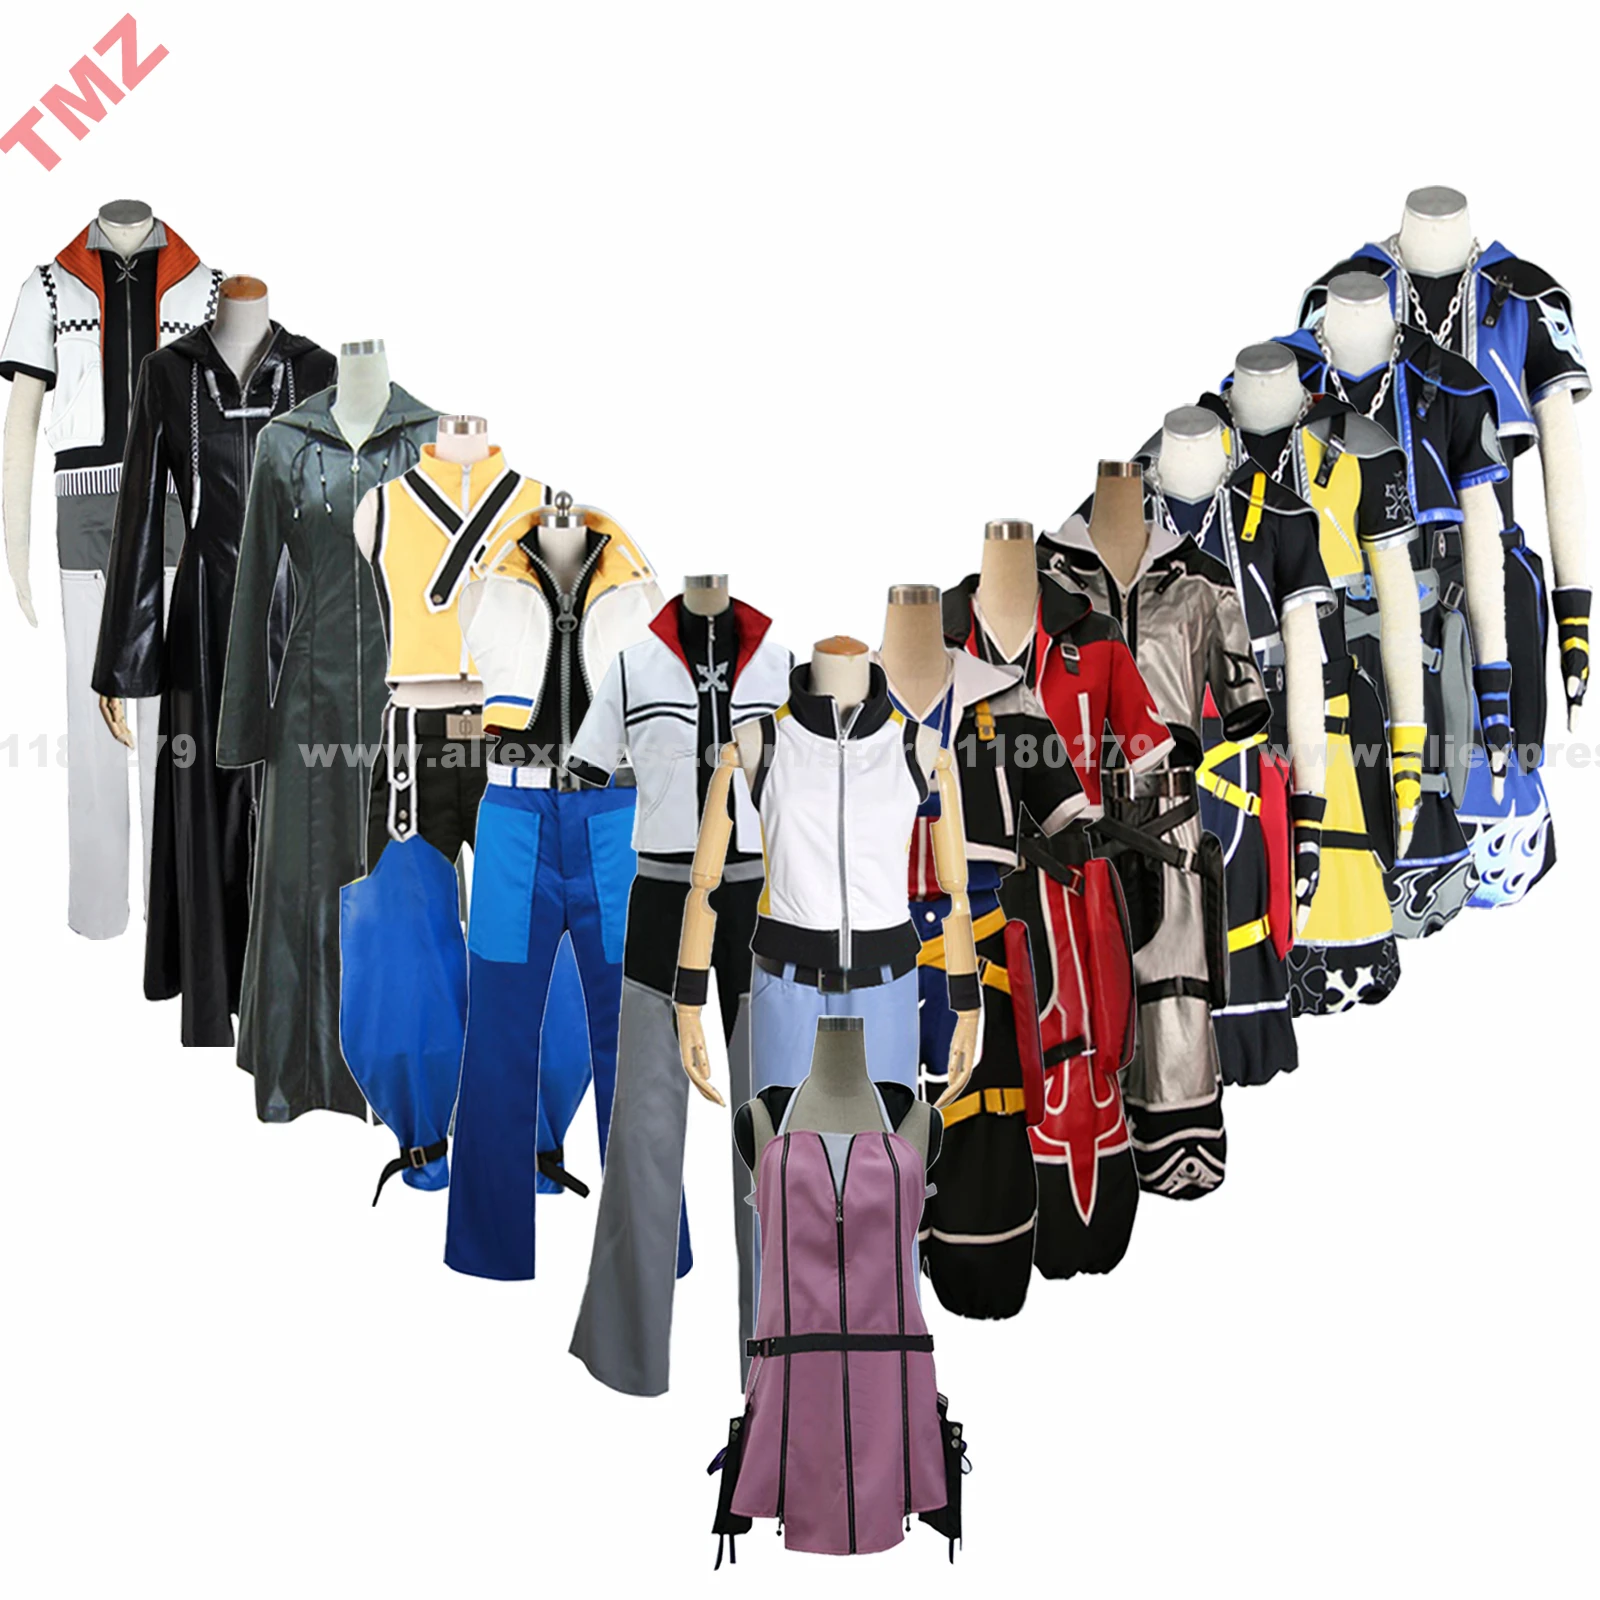 

Kingdom Hearts ROXAS Riku True Sora Kairi Group of Characters Clothing Anime Clothes Cosplay Costume,Customized Accepted